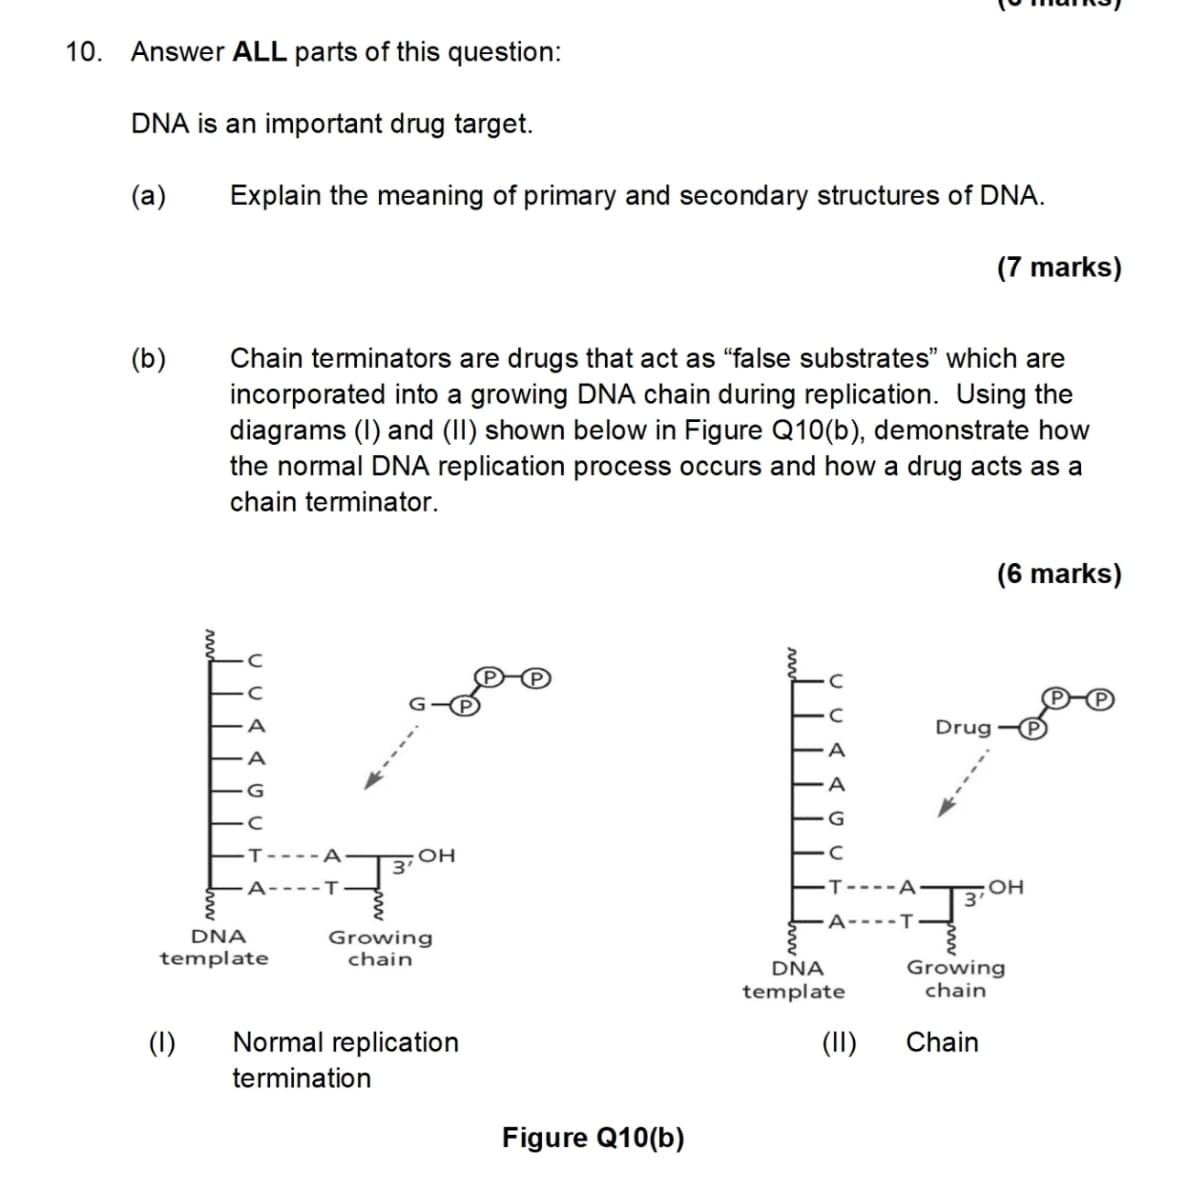 10. Answer ALL parts of this question:
DNA is an important drug target.
(a)
Explain the meaning of primary and secondary structures of DNA.
(7 marks)
(b)
Chain terminators are drugs that act as "false substrates" which are
incorporated into a growing DNA chain during replication. Using the
diagrams (1) and (II) shown below in Figure Q10(b), demonstrate how
the normal DNA replication process occurs and how a drug acts as a
chain terminator.
A
C
Drug
A
(6 marks)
DNA
template
A
G
C
T--- A
OH
3'
A-T
Growing
chain
G
C
T-
OH
A----T
DNA
template
Growing
chain
(1)
Normal replication
(II)
Chain
termination
Figure Q10(b)